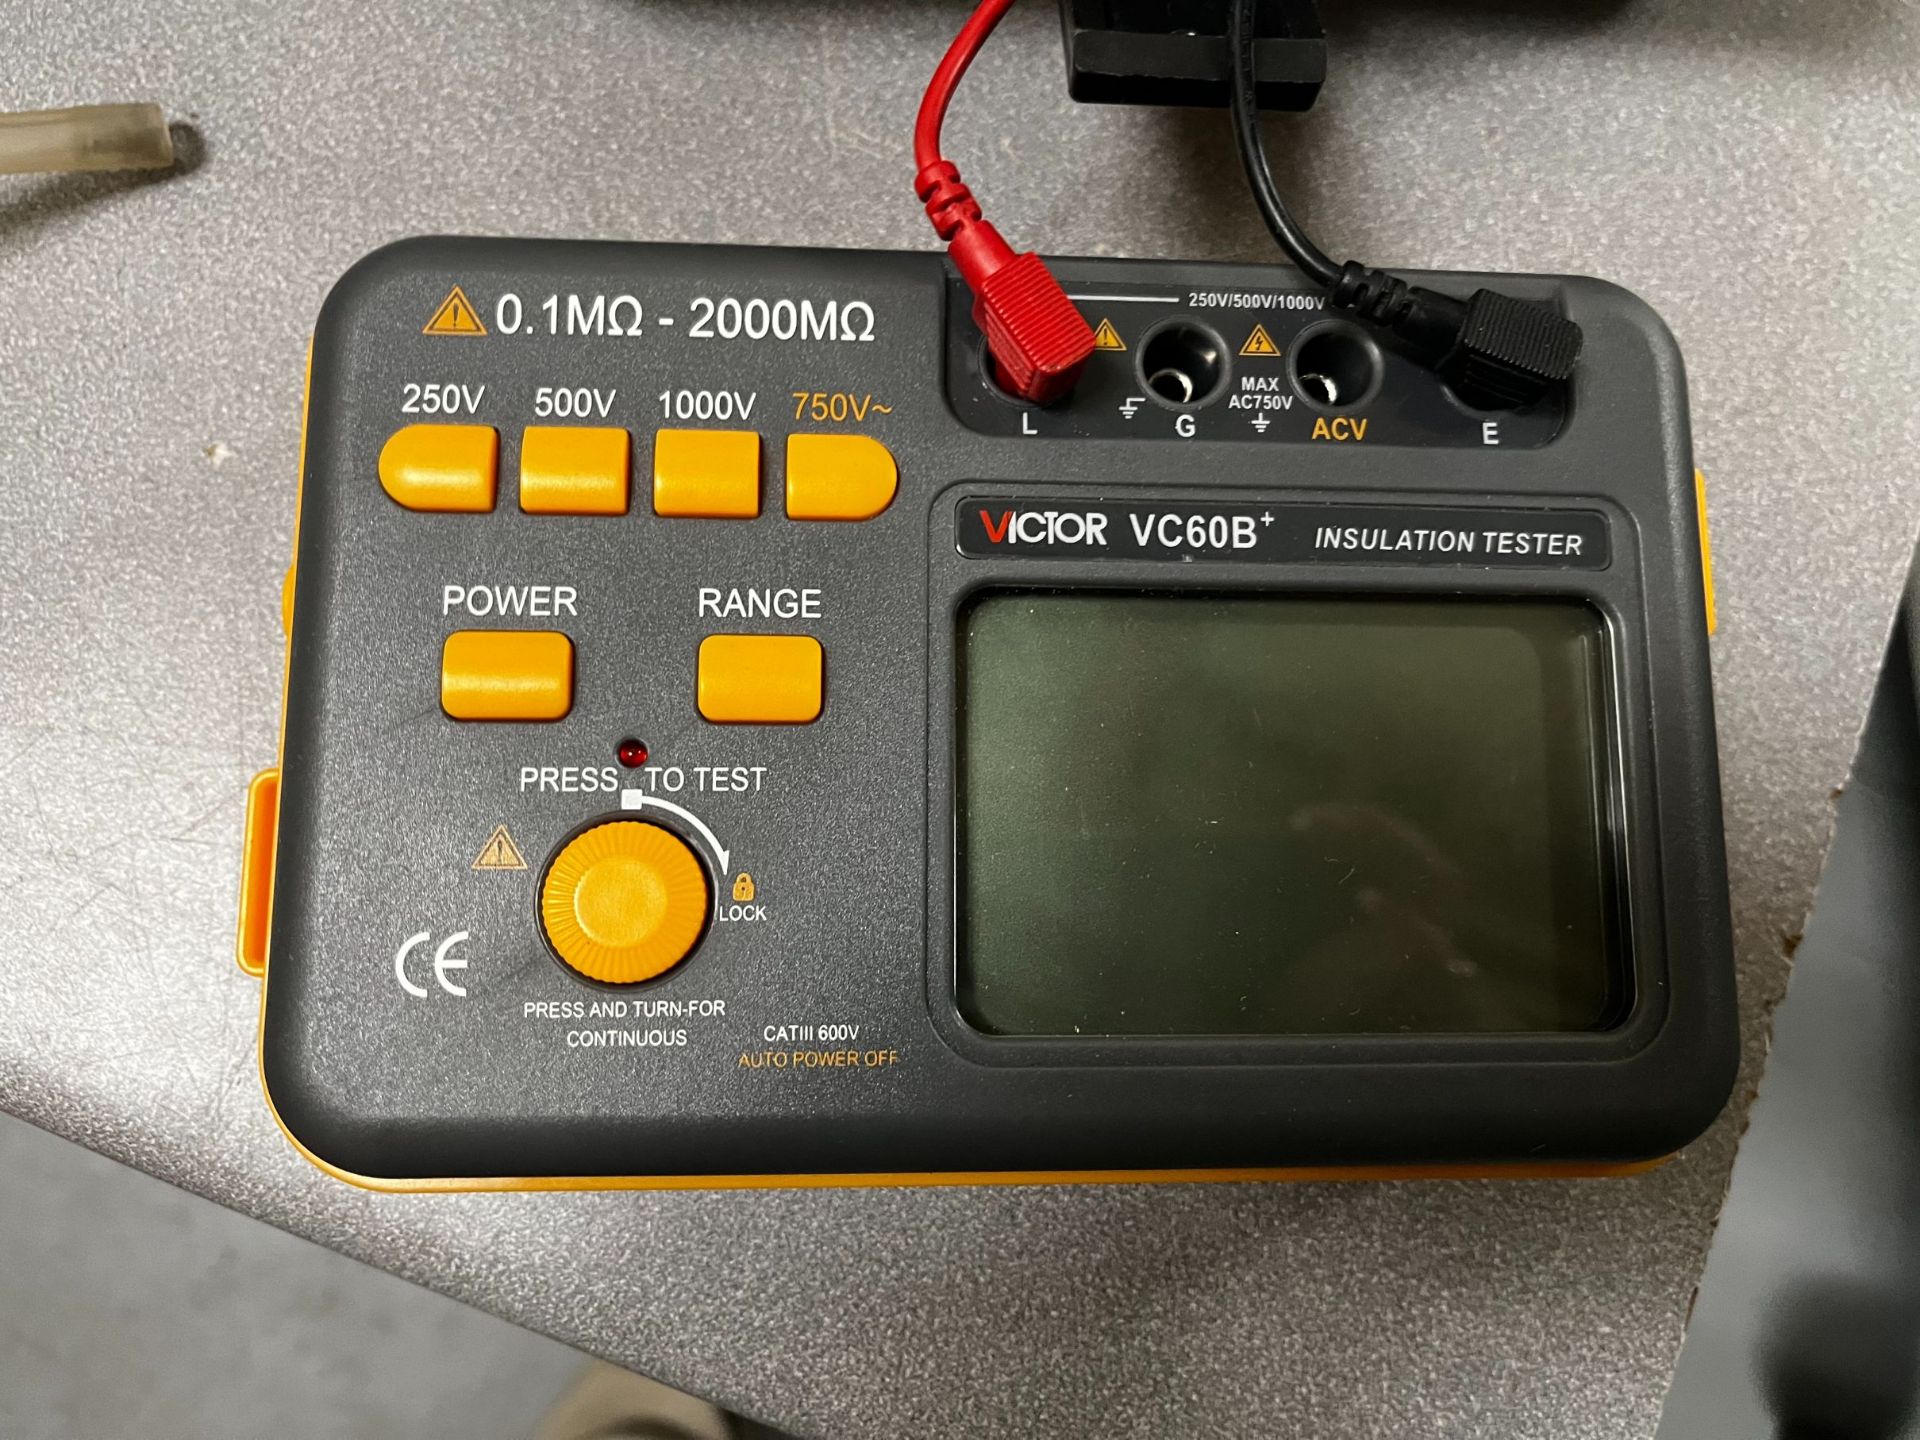 Insulation tester VICTOR VC60B - Image 2 of 3